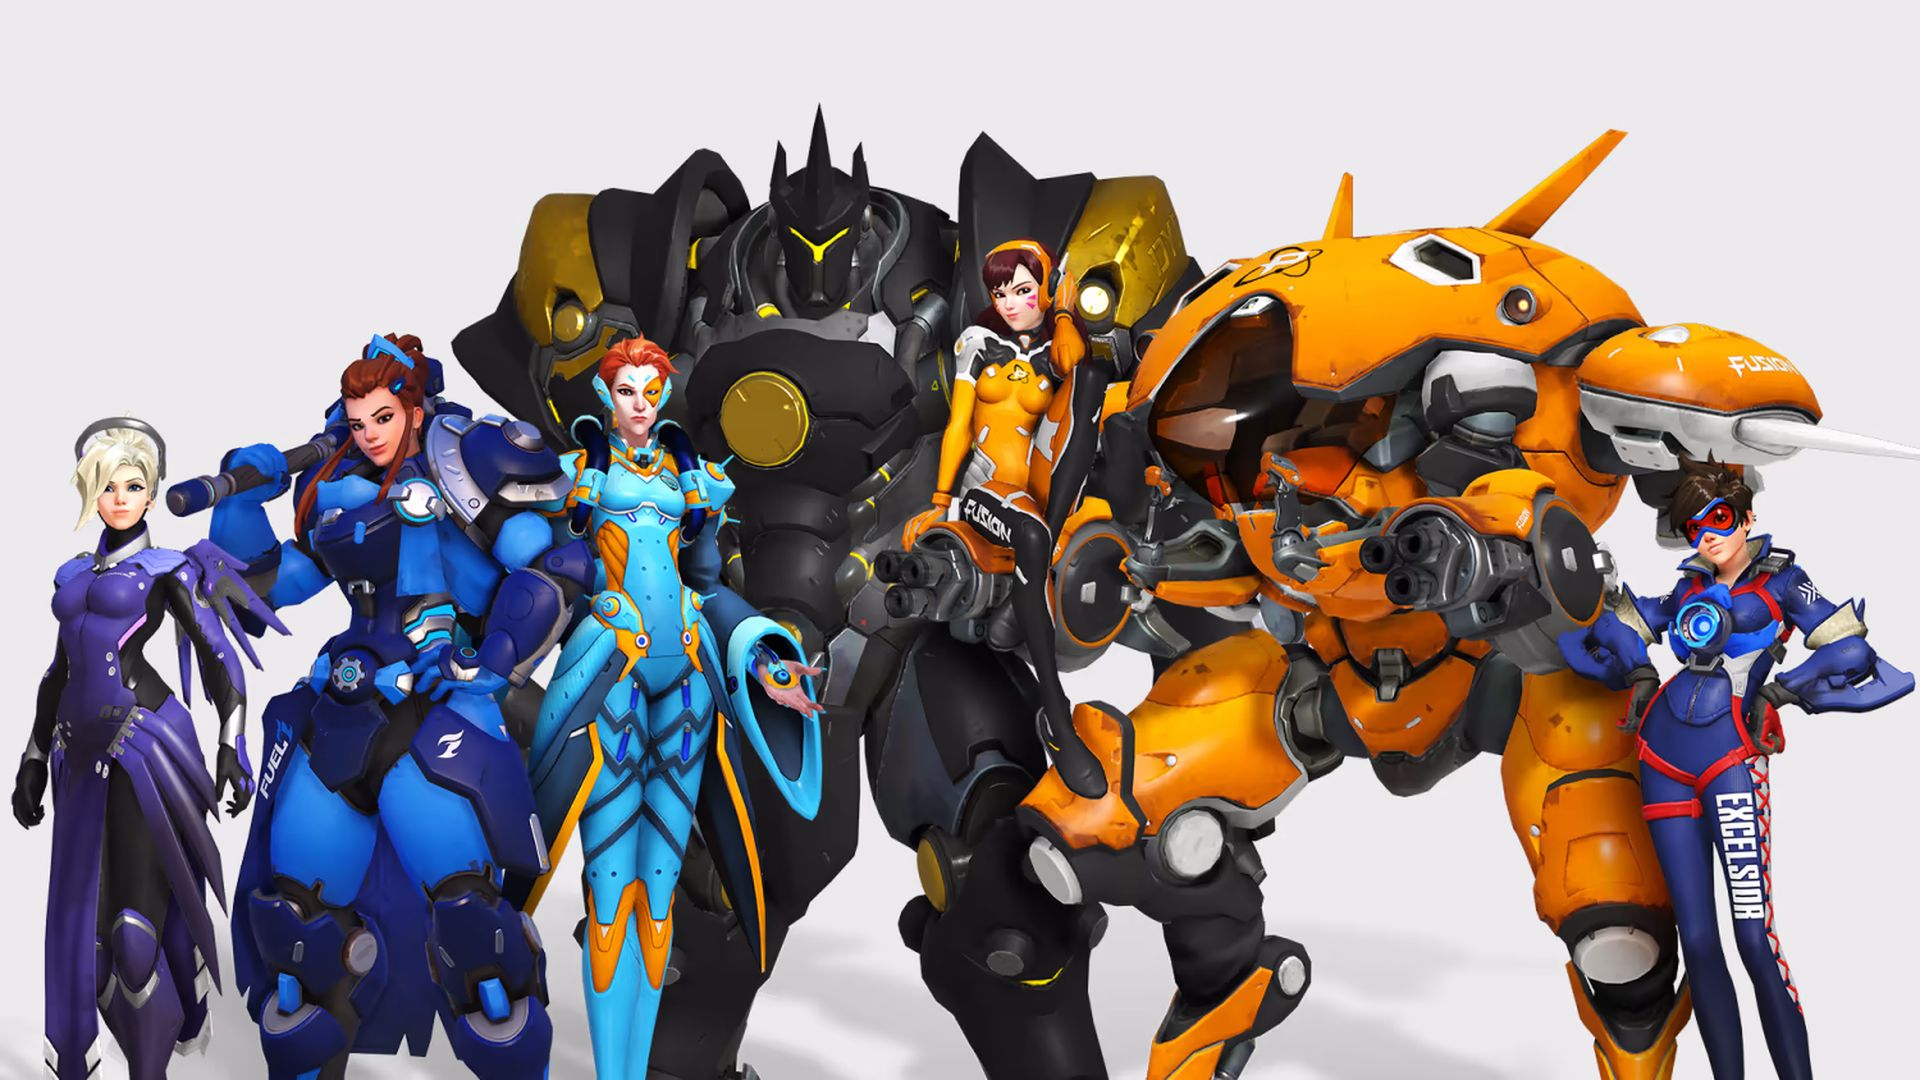 In this article, we are going to go over how to join Overwatch League, as well as all of the active Overwatch esports teams that are currently competing.